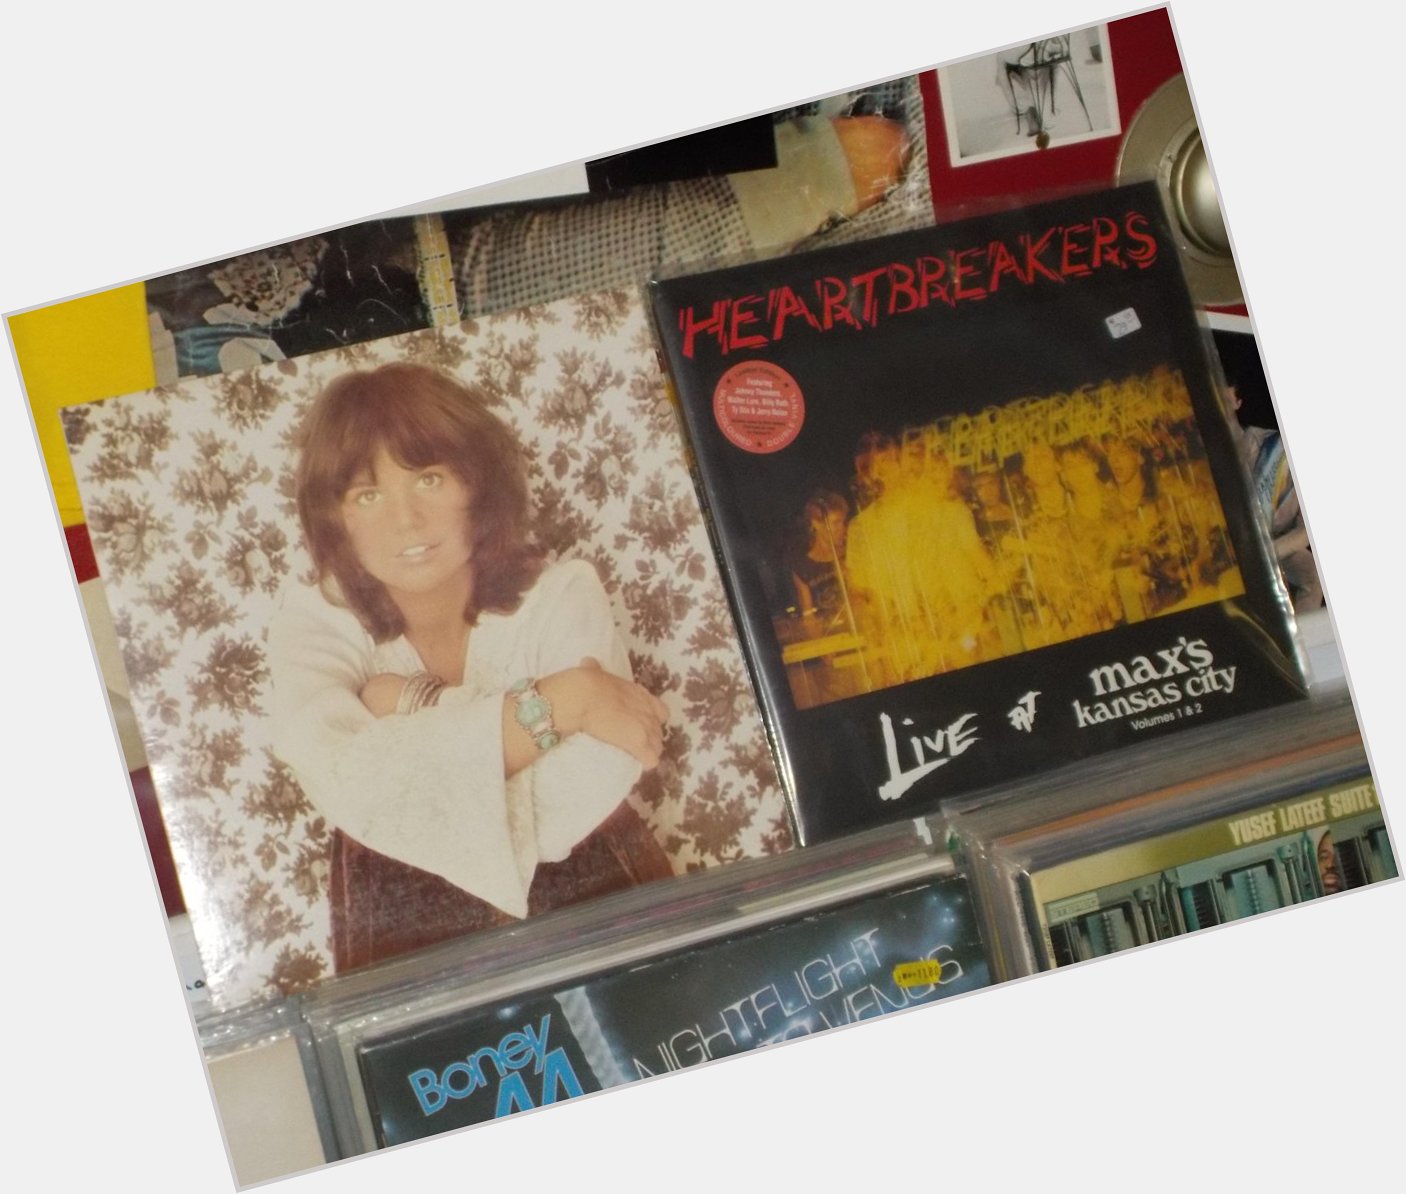 Happy Birthday to Linda Ronstadt and the late Johnny Thunders (New York Dolls) 